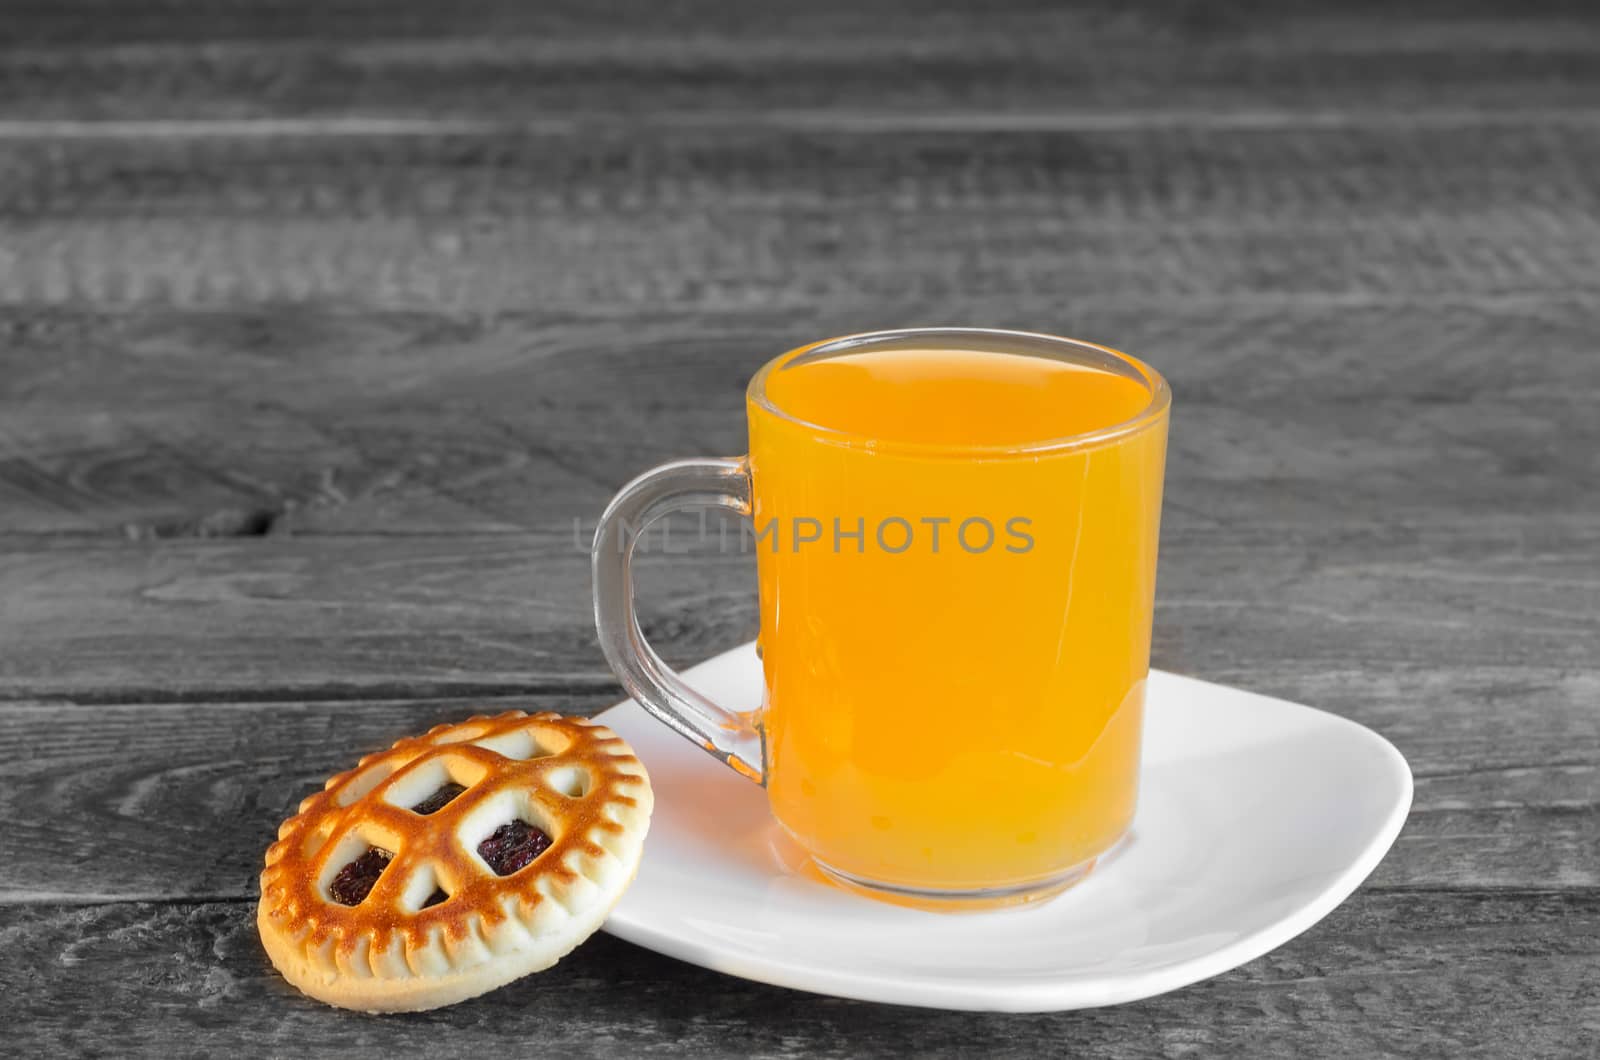 Cookies and orange juice in a circle on a grey wooden background. Selective focus.